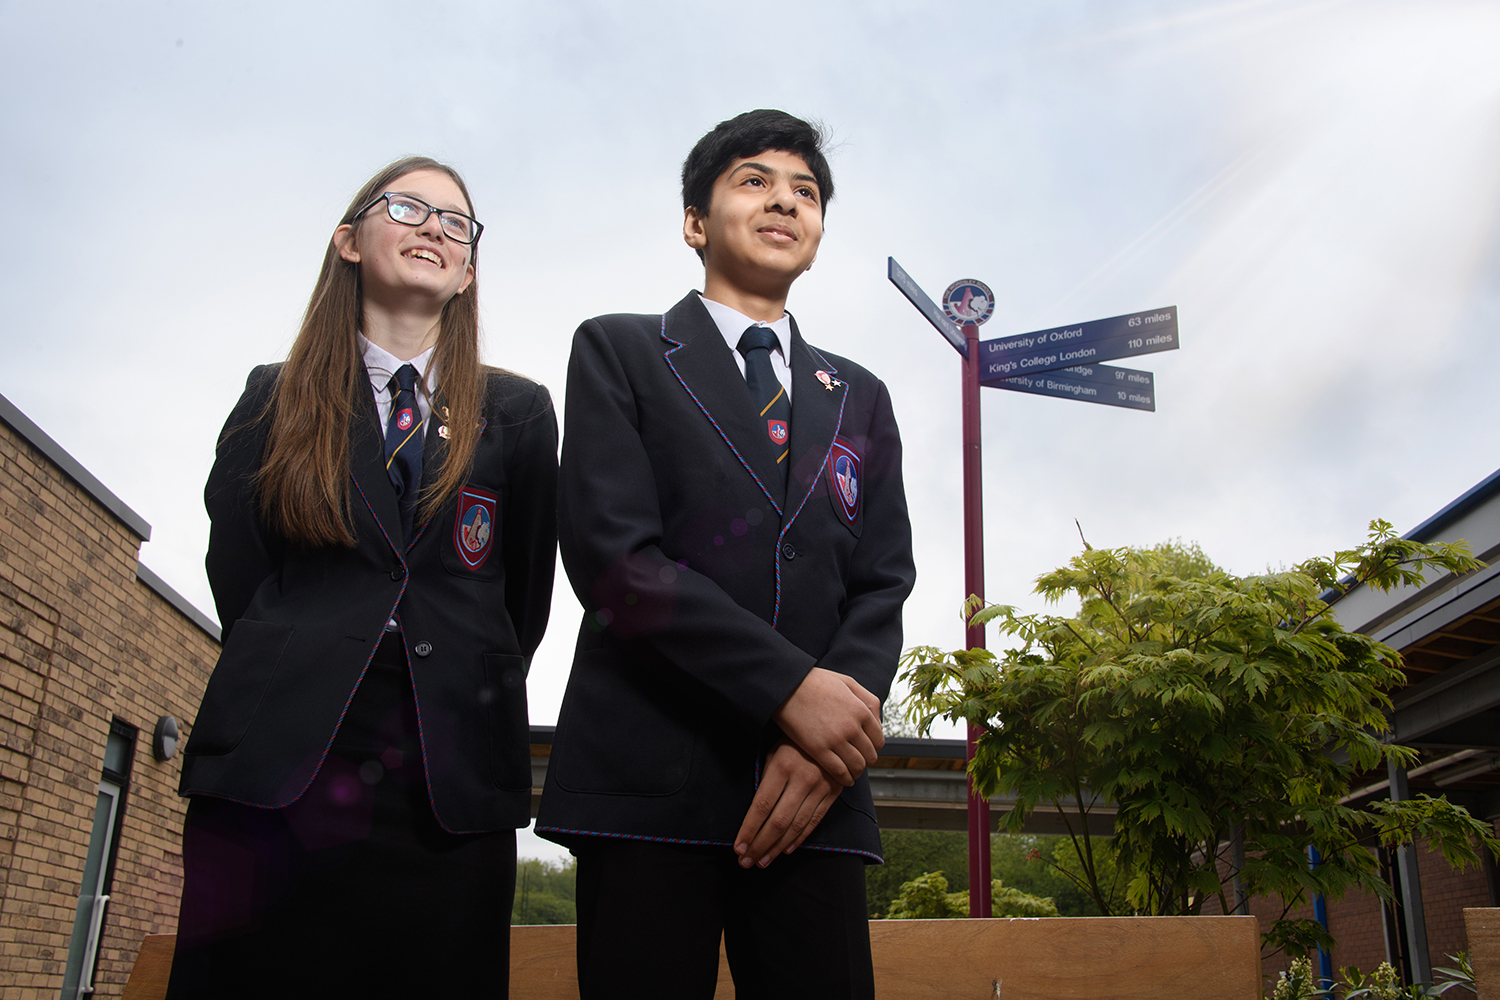 Lower shot of male and female student standing next to school sign looking out into distance